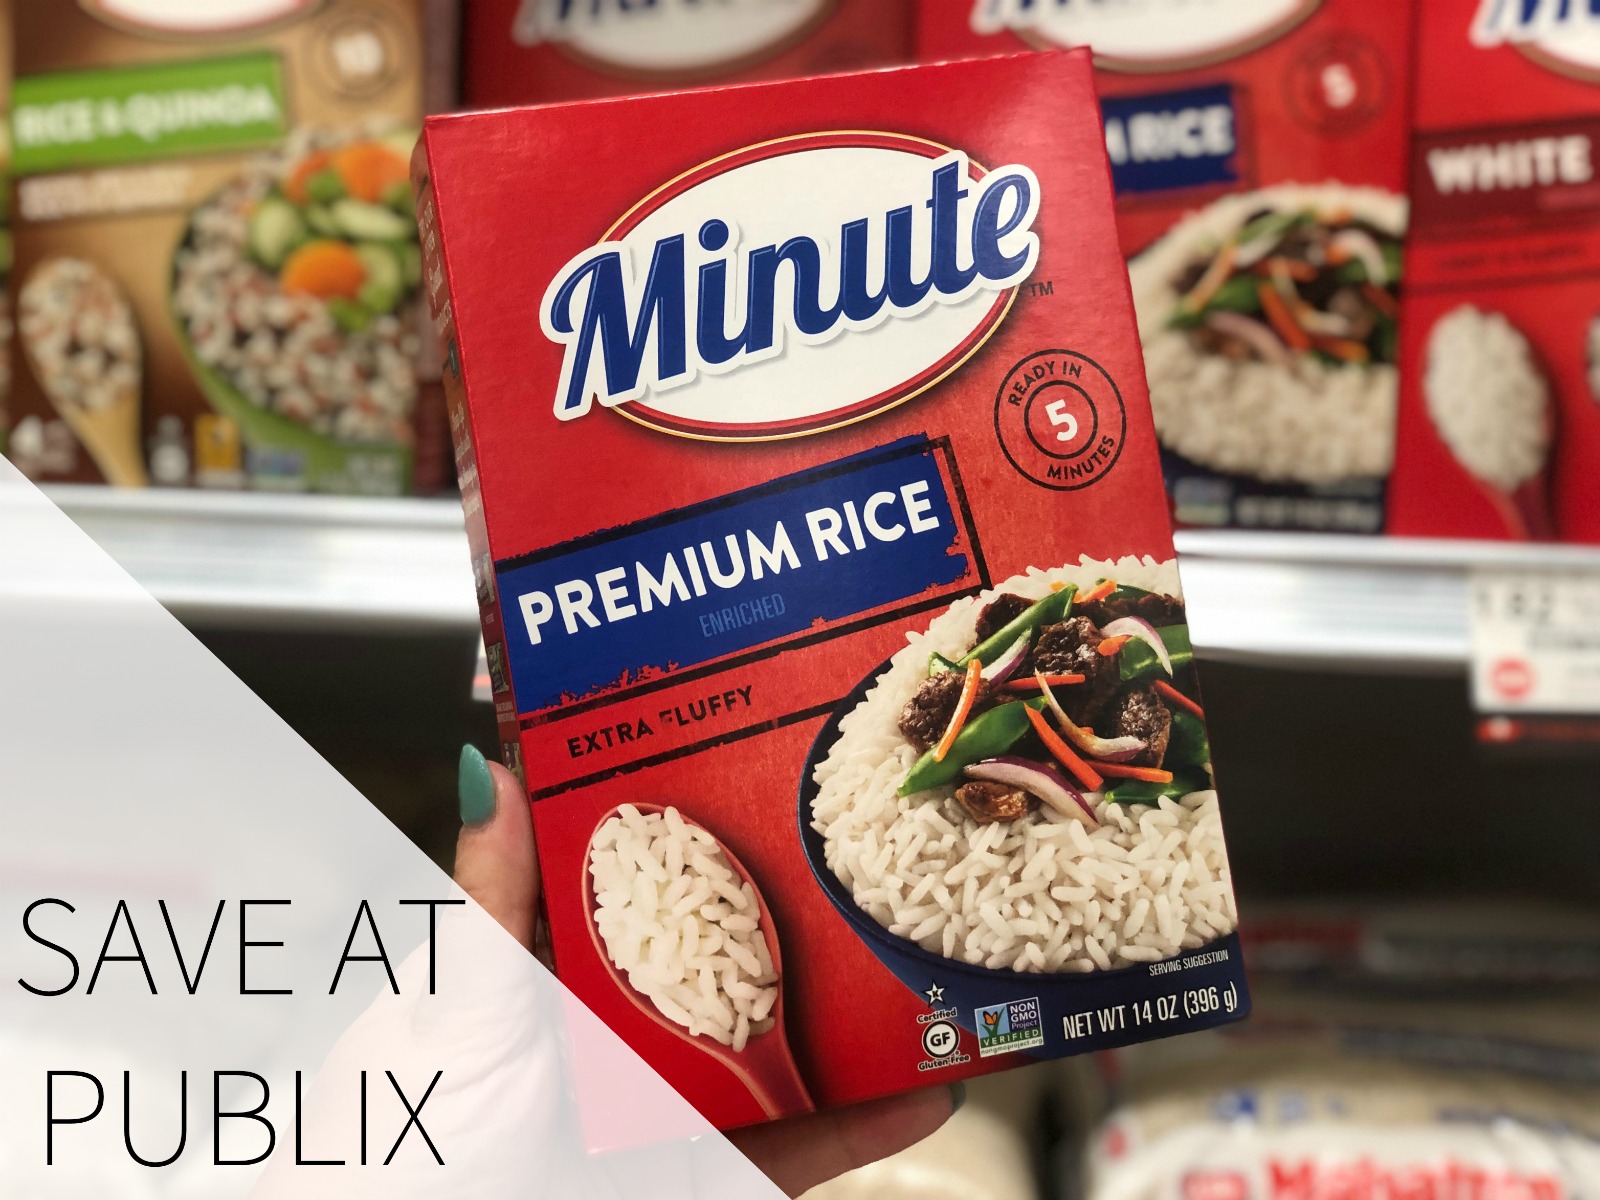 Quick & Easy Bulgogi For Your Busy Weeknight - Save On Minute Instant Rice Now At Publix on I Heart Publix 4